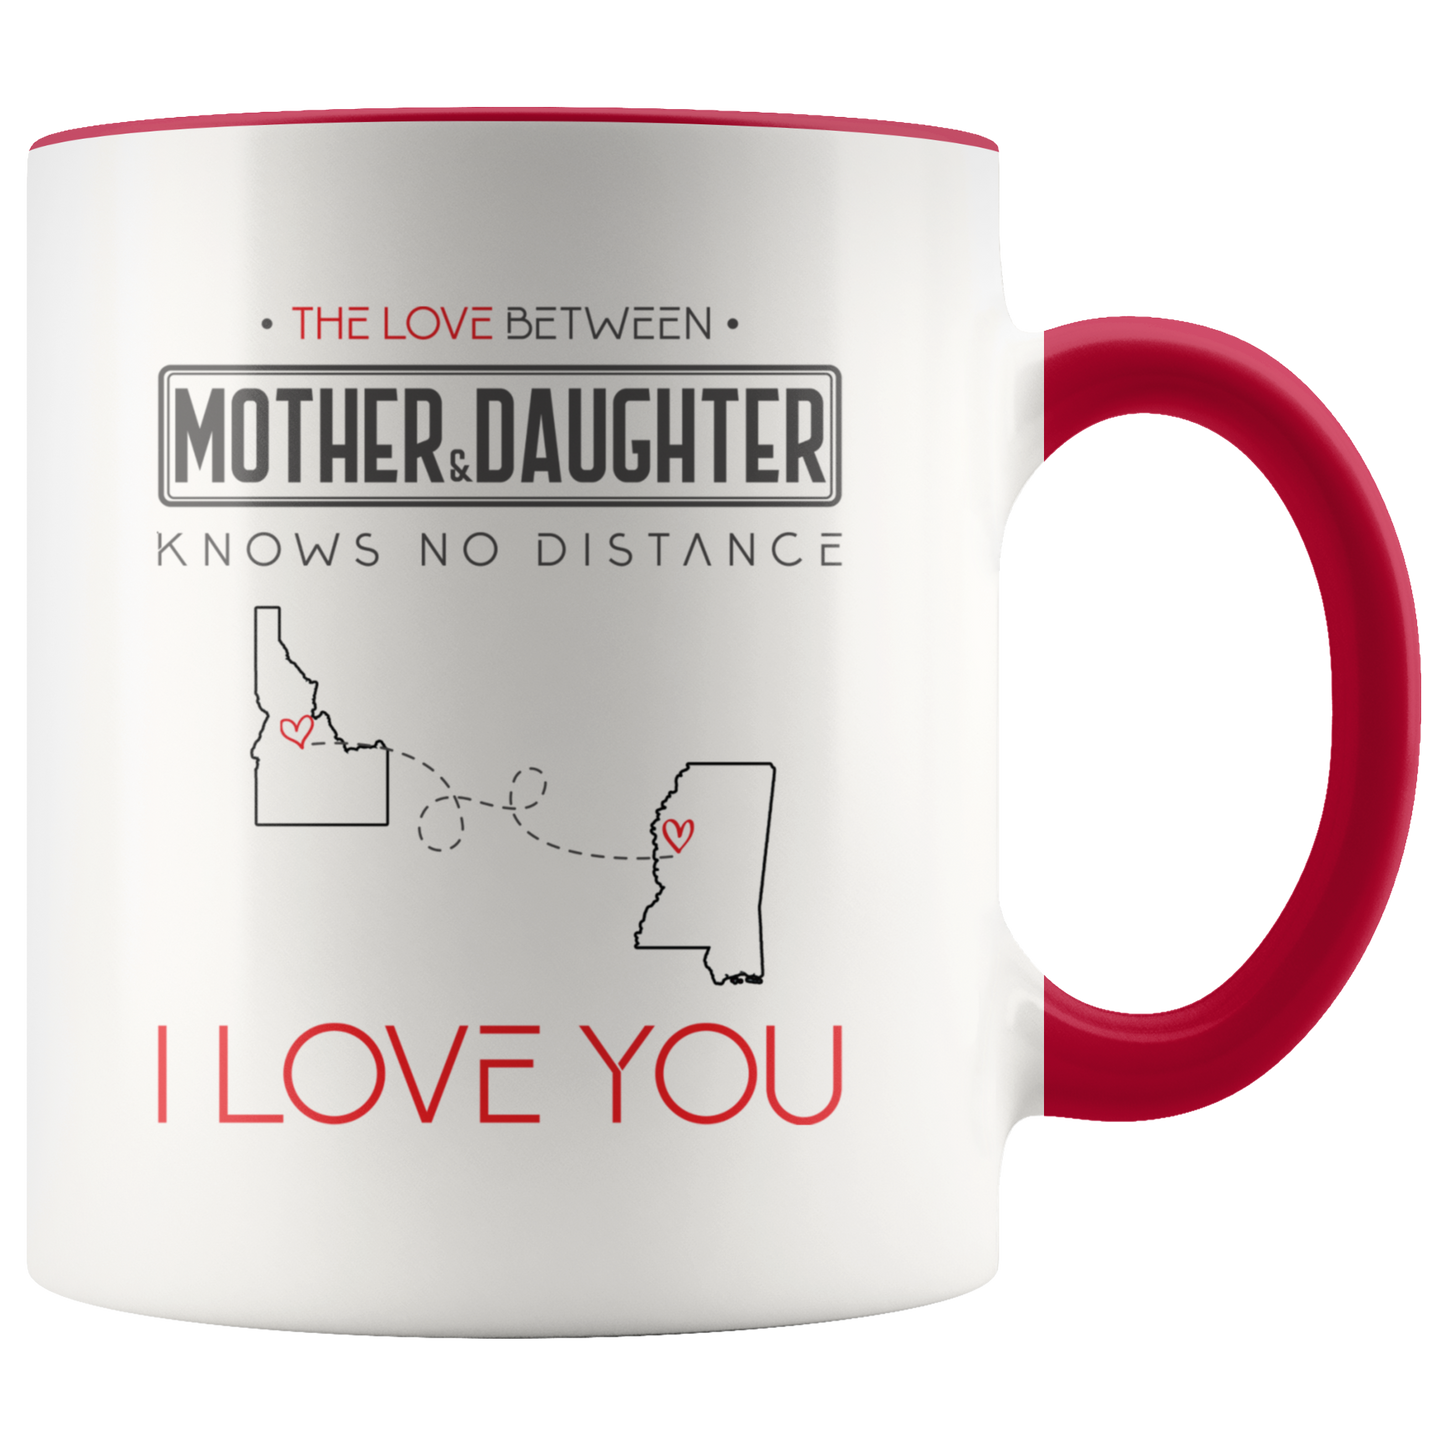 ND-21314960-sp-24135 - [ Idaho | Mississippi ]Mom And Daughter Accent Mug 11 oz Red - The Love Between Mot